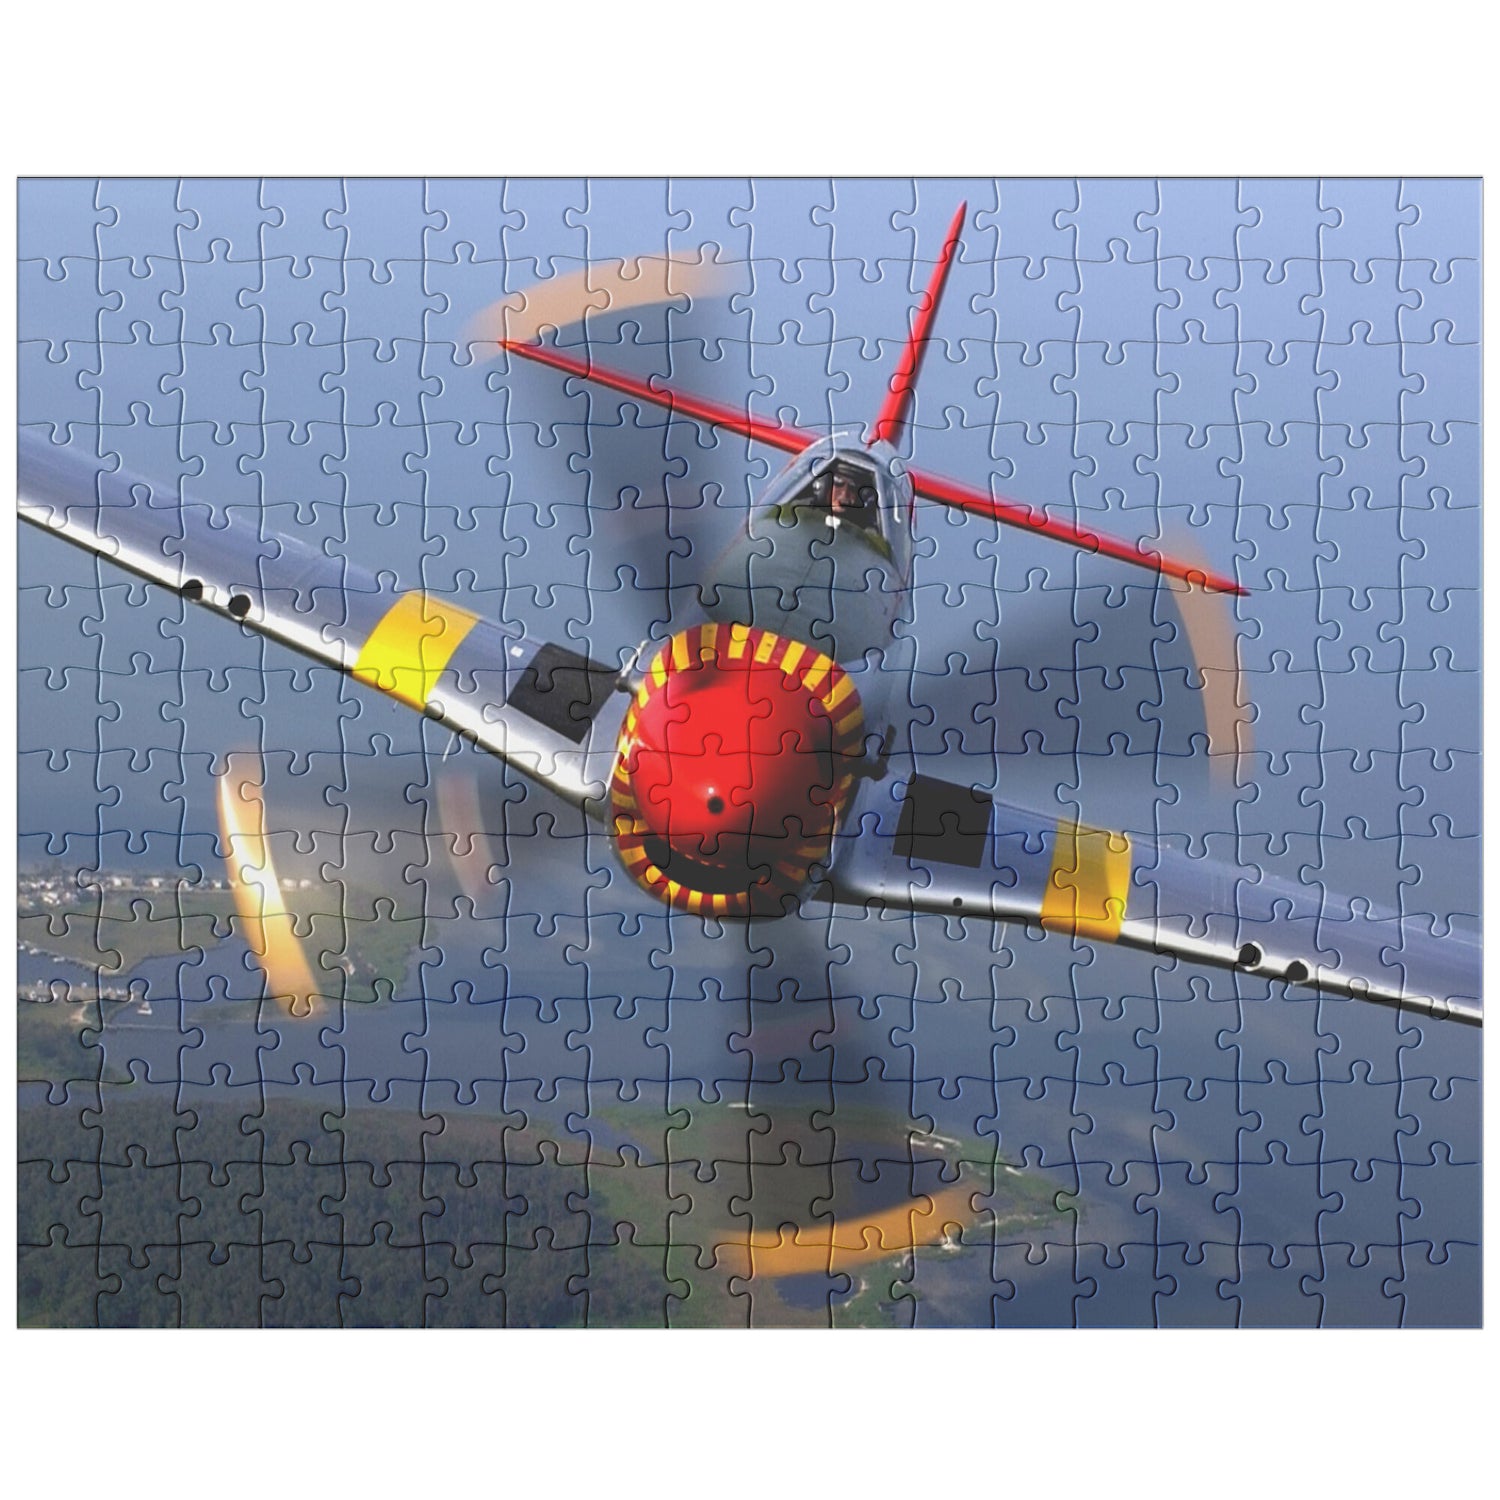 Aviation themed jigsaw puzzle (P51 Mustang)